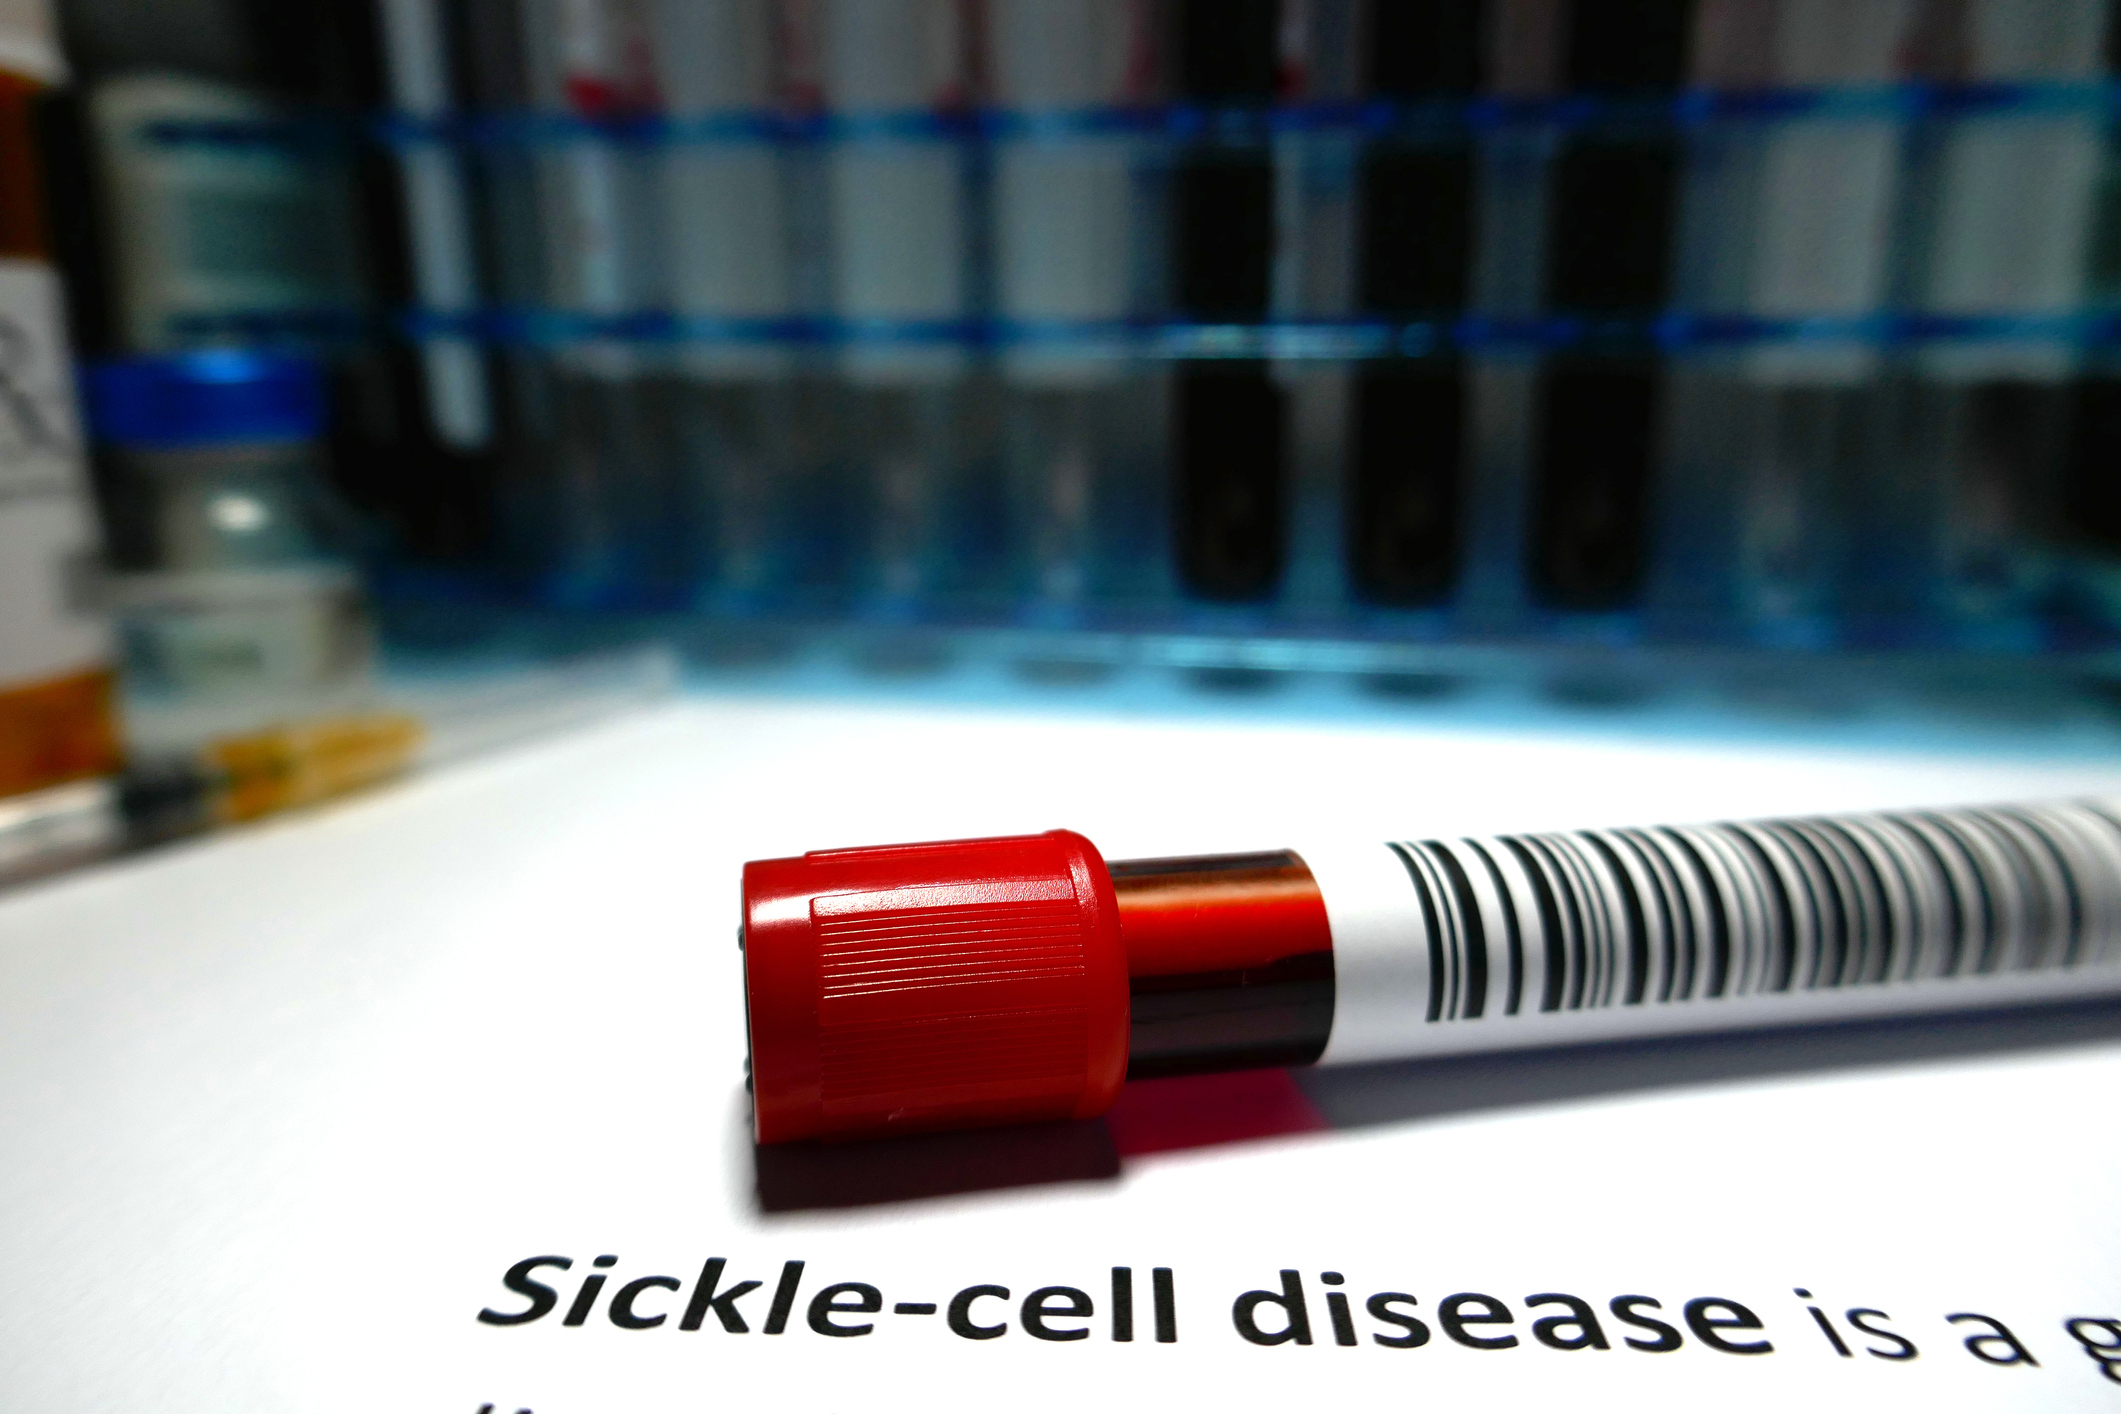 The battle against Sickle Cell